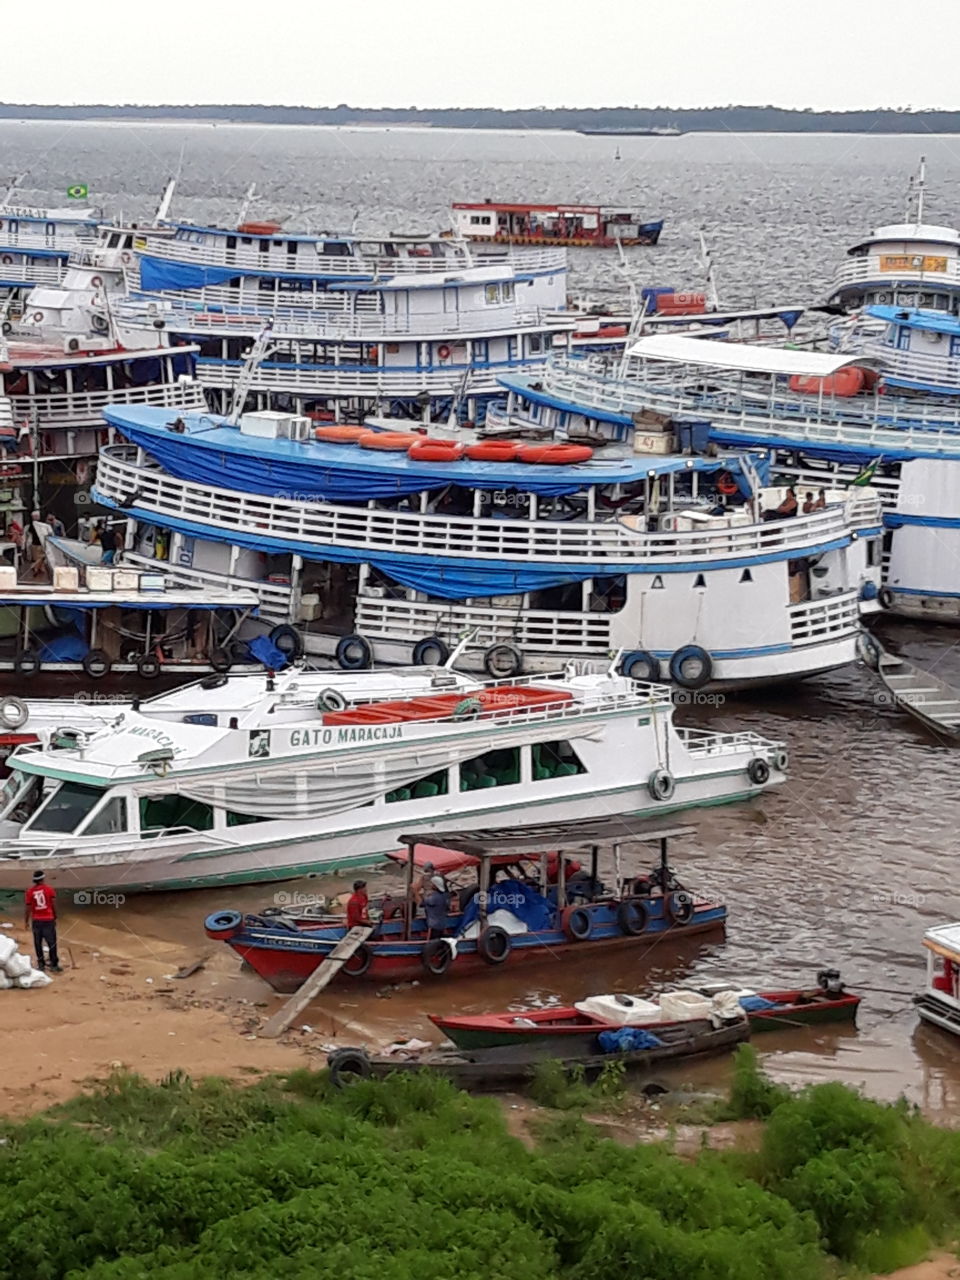 Boats in Manaus